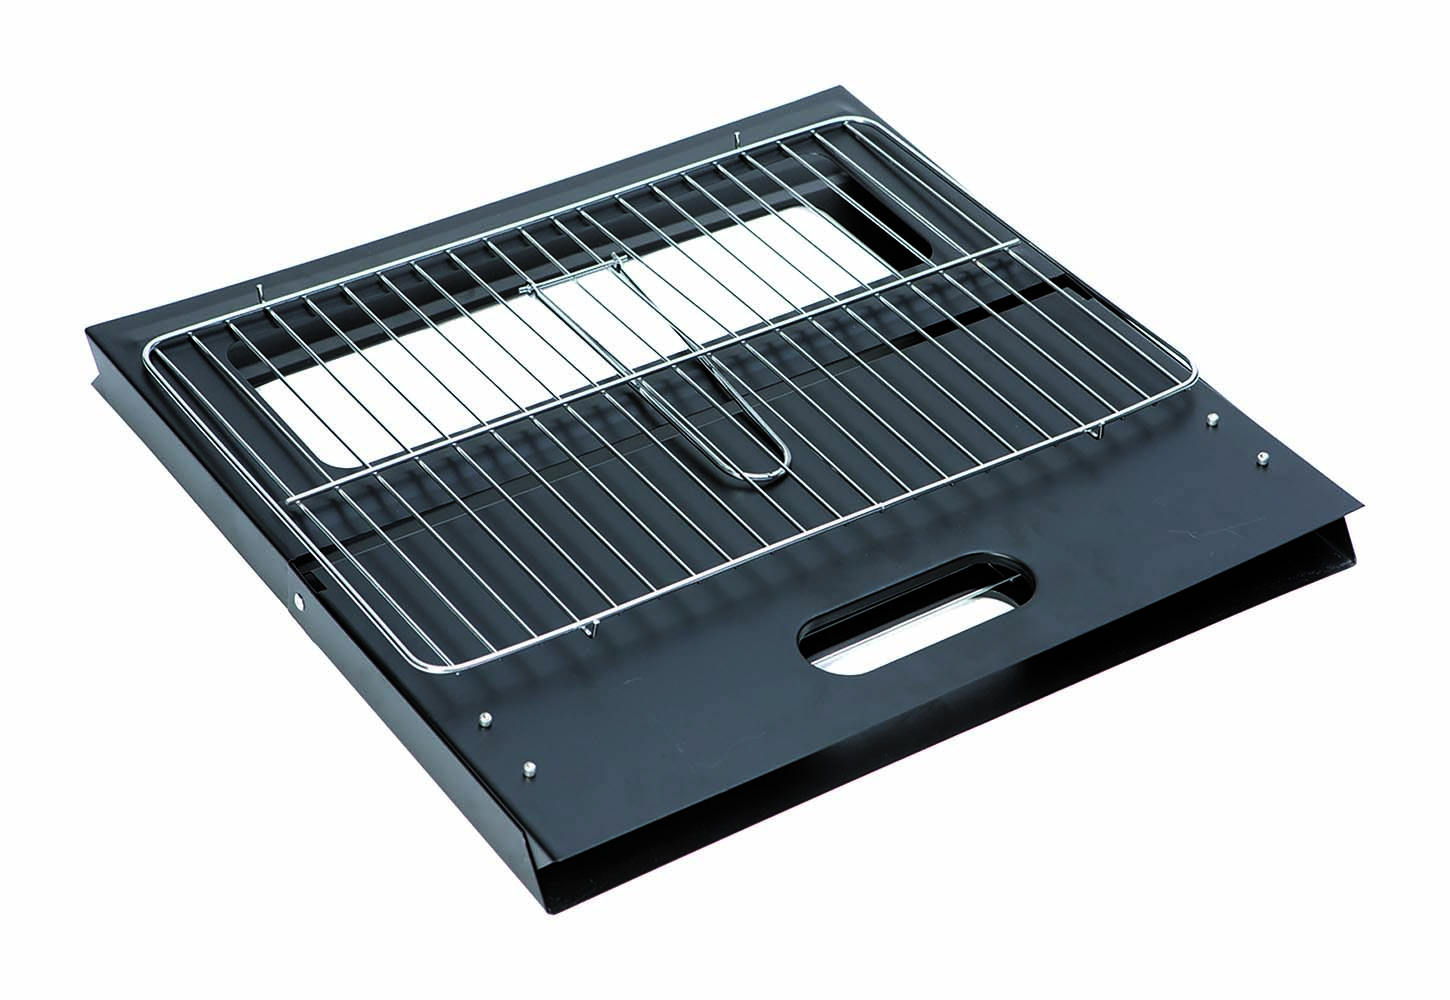 Bo-Camp - Barbecue - Notebook/Fire basket - Charcoal detail 2